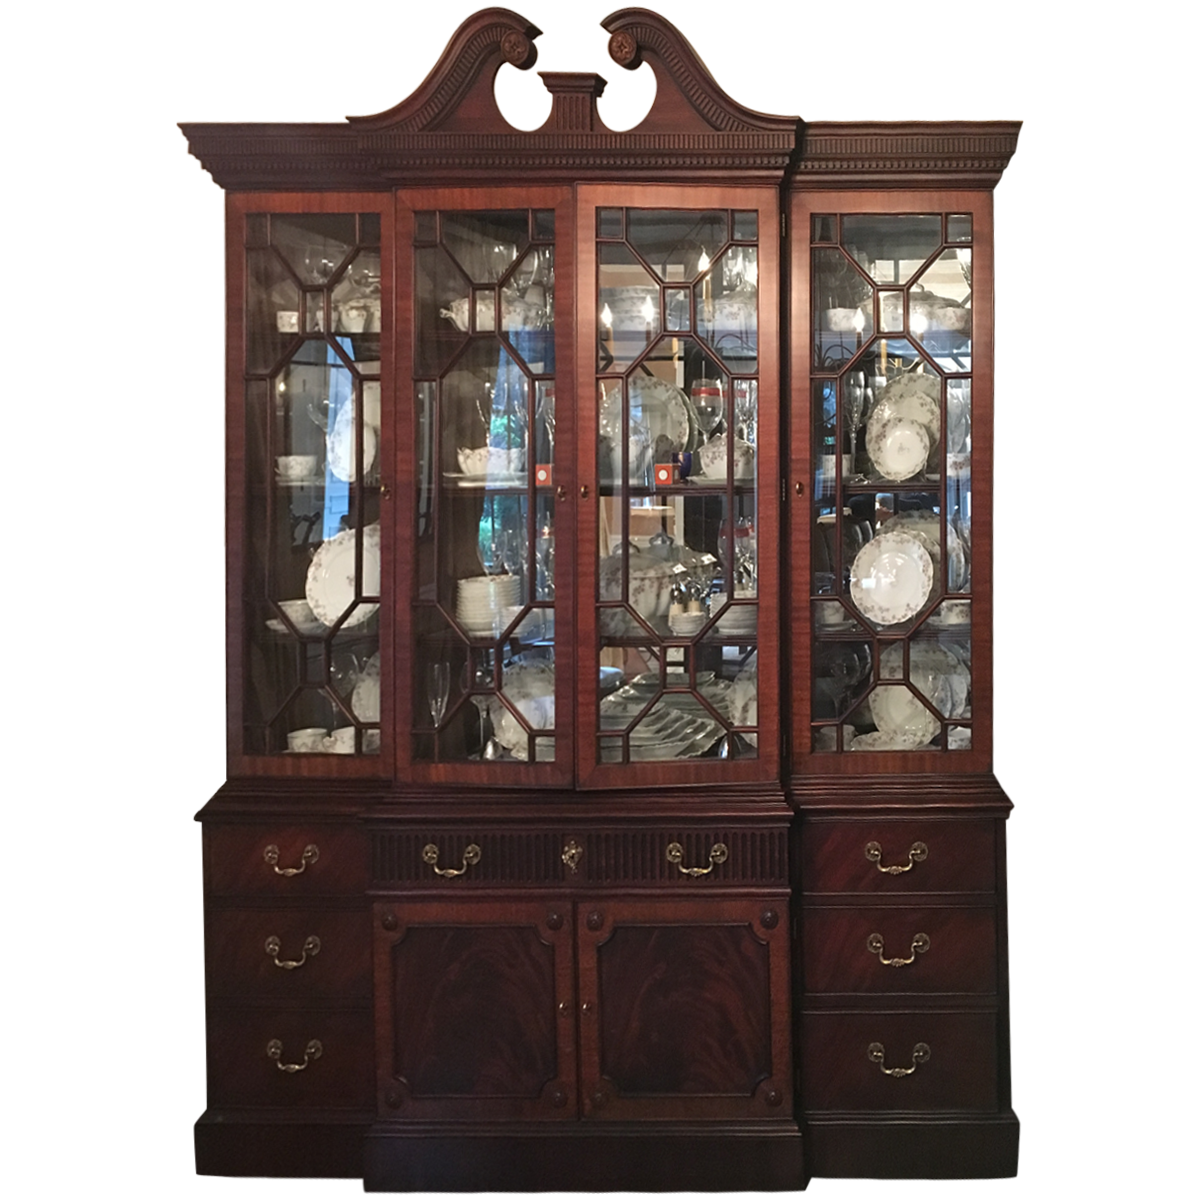 China Cabinet HD PNG Image High Quality PNG Image